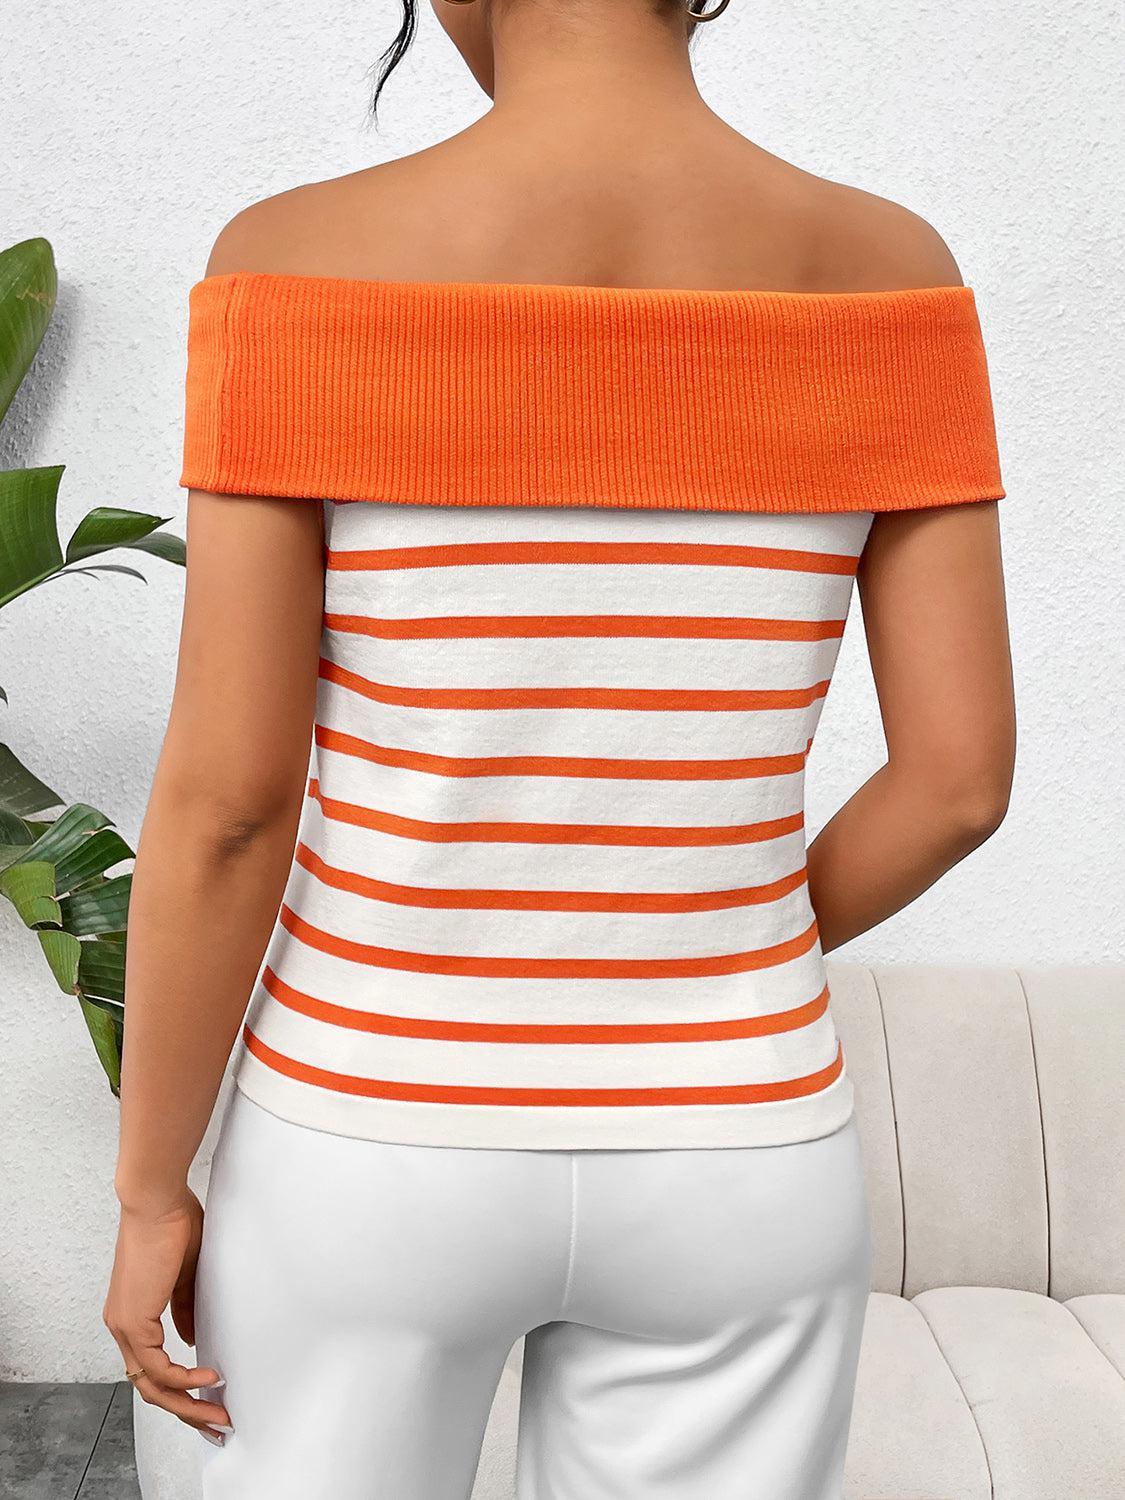 a woman wearing an orange and white striped top